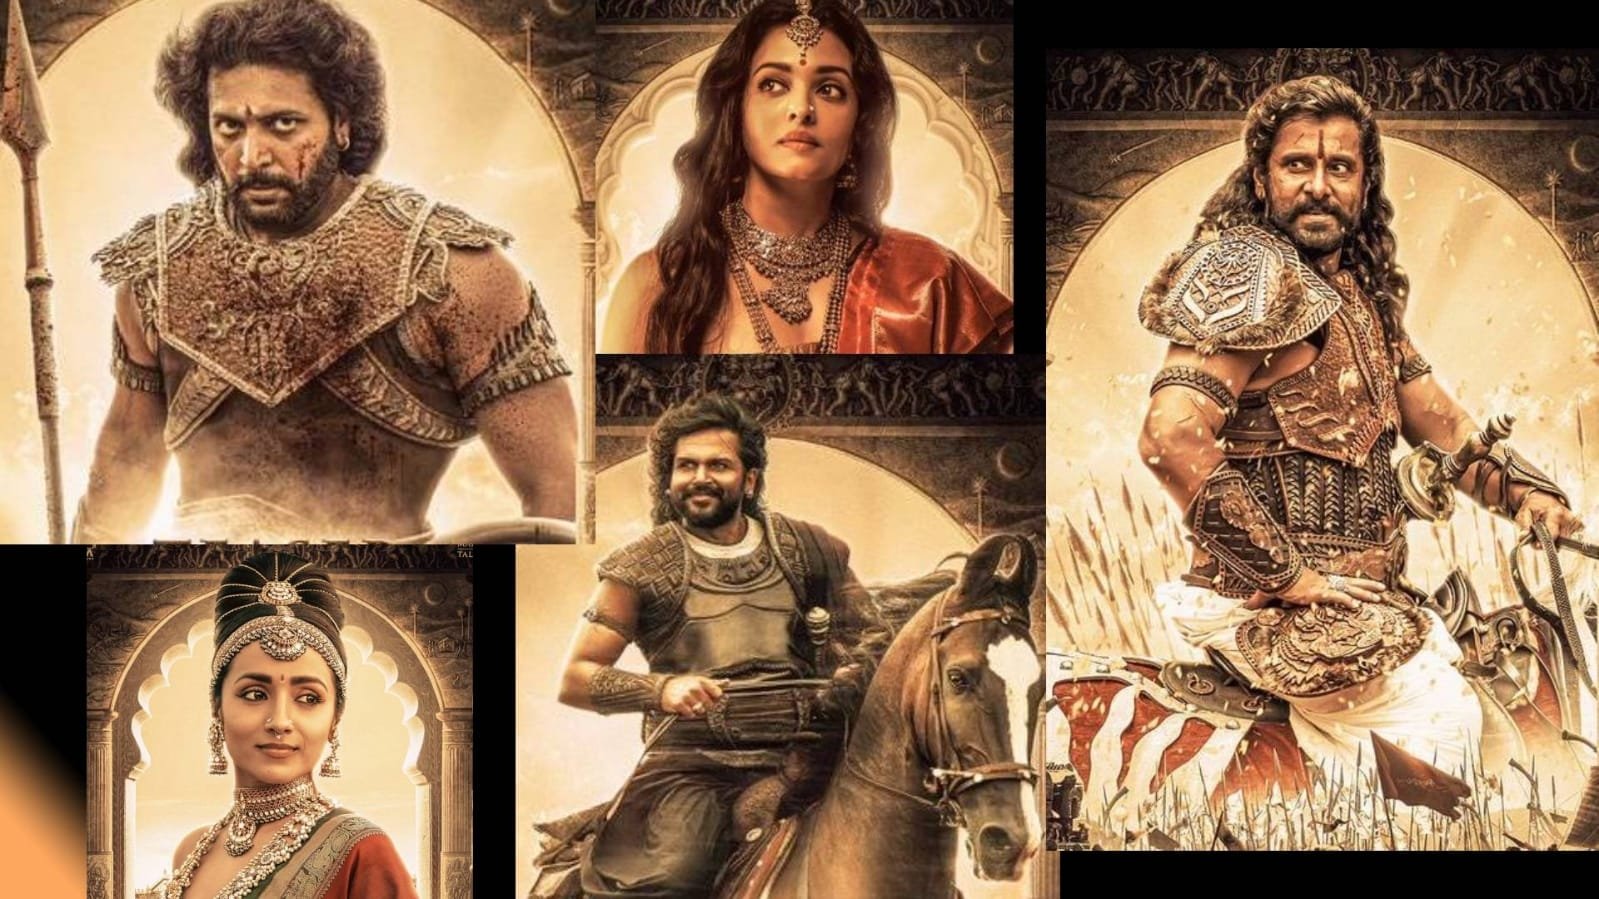 Excitement-Over-Aishwarya-Rai-Vikrams-Ponniyin-Selvan-2-As-Trailer-Is-Released-IndiaWest-India-West